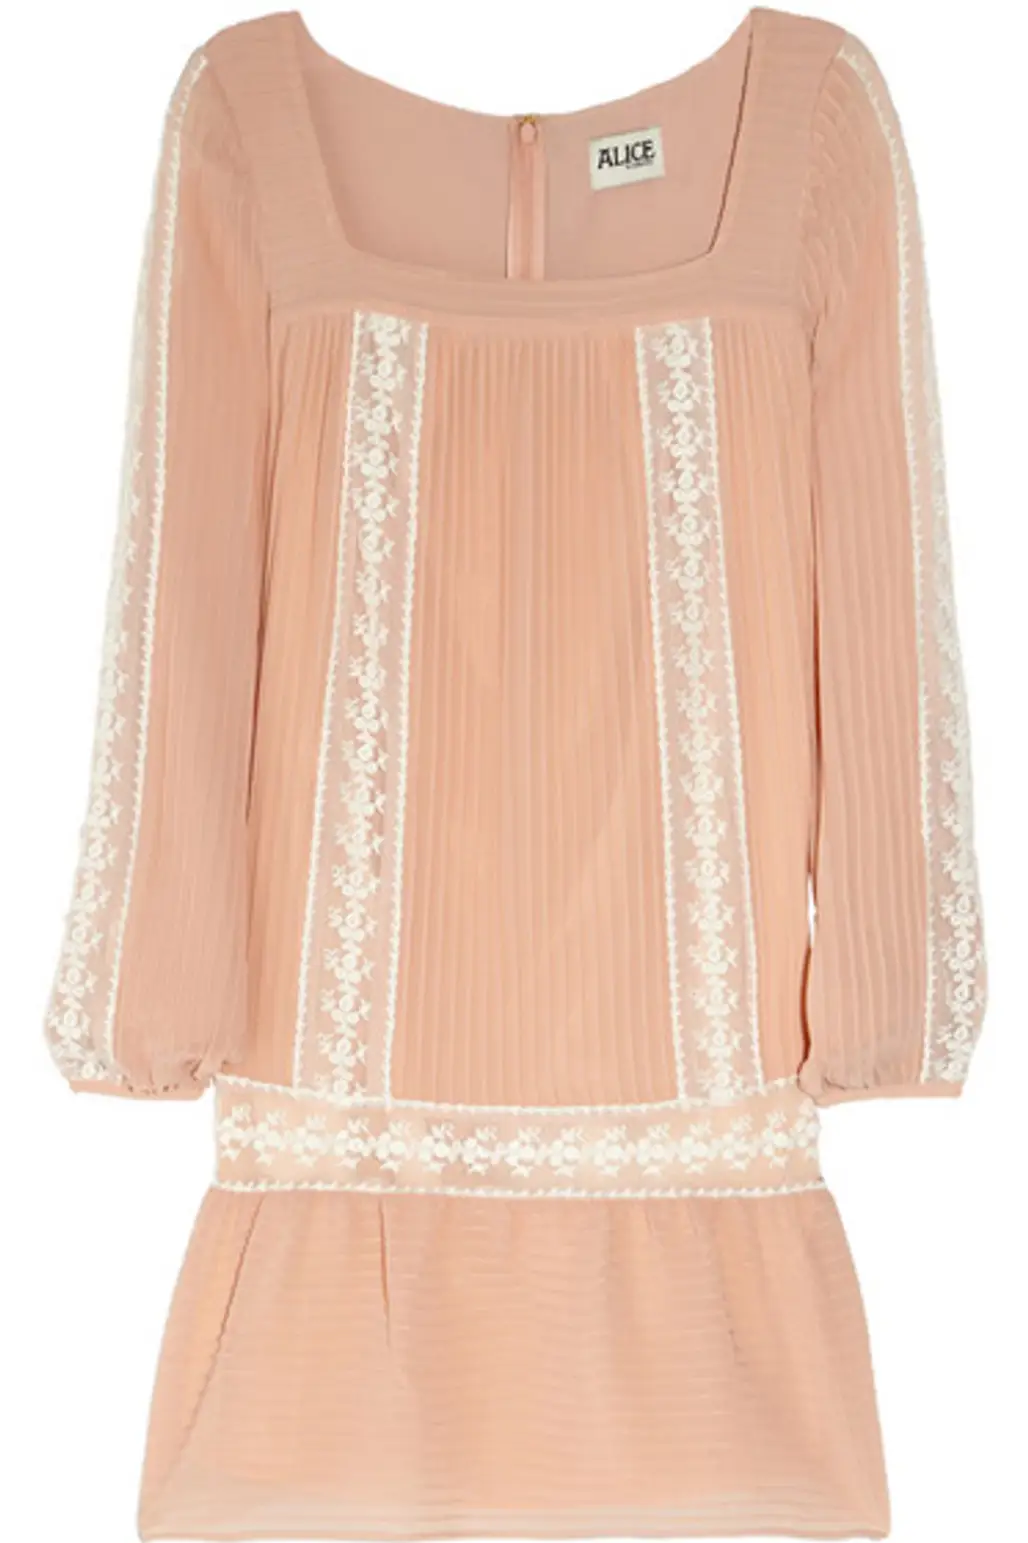 Alice by Temperley Tunic Dress